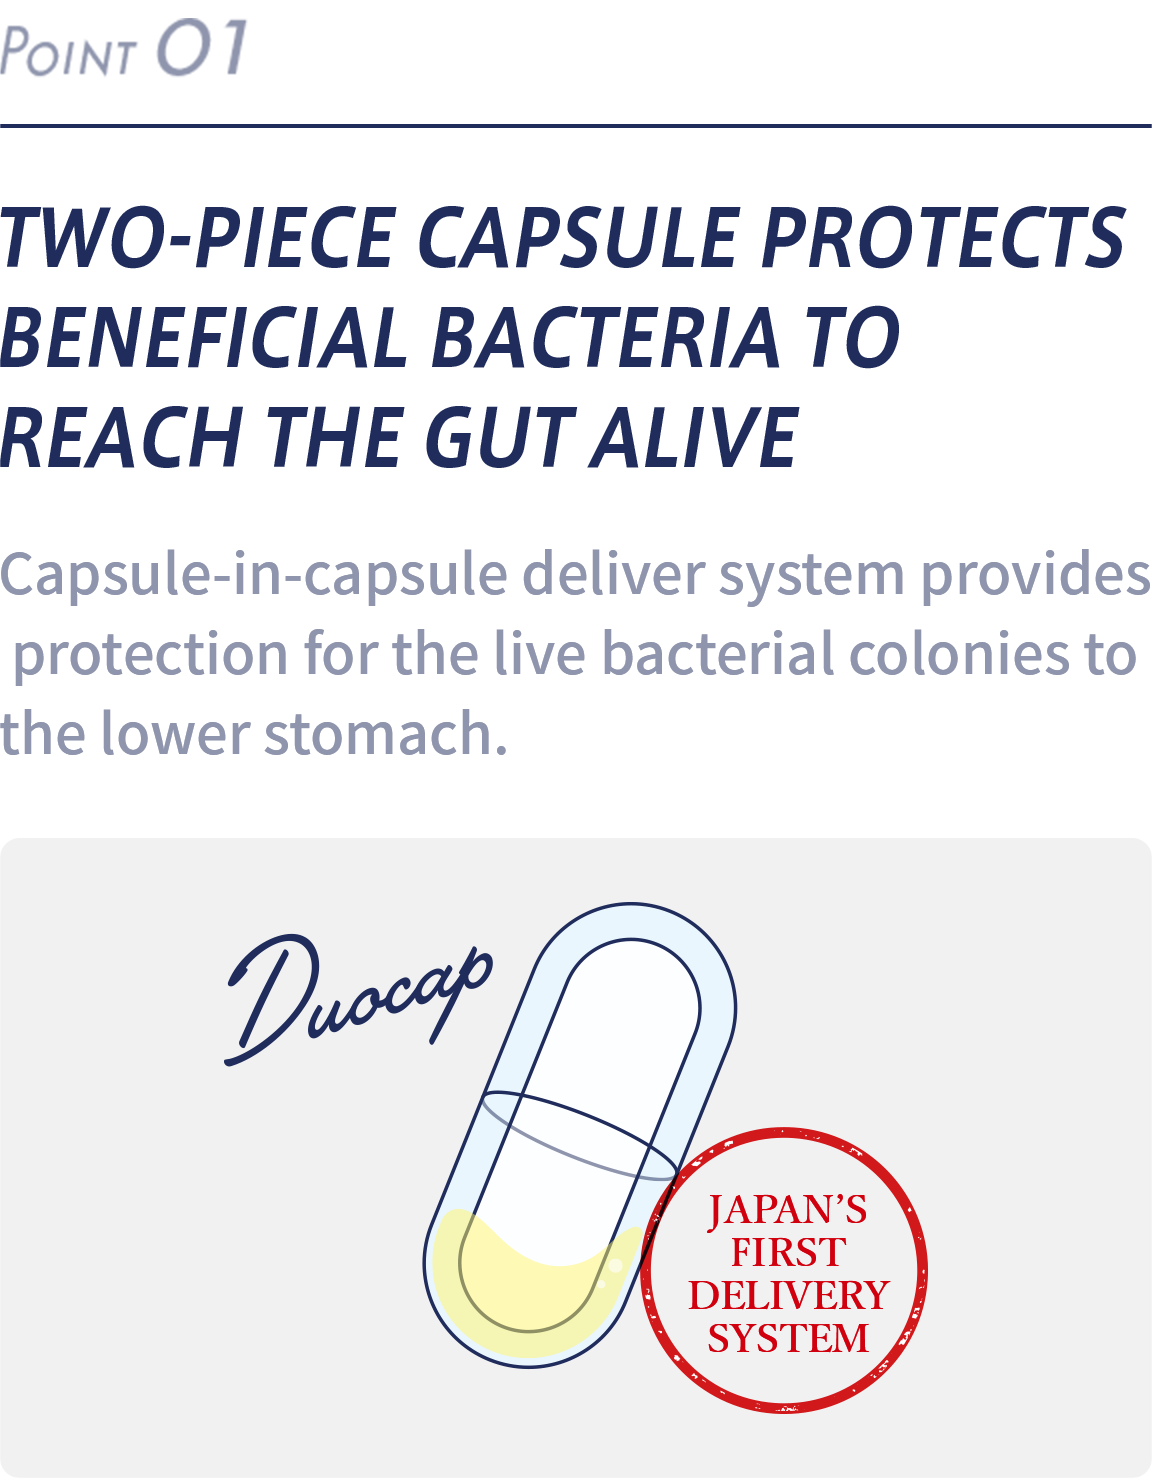 TWO-PIECE CAPSULE PROTECTS BENEFICIAL BACTERIA TO REACH THE GUT ALIVE